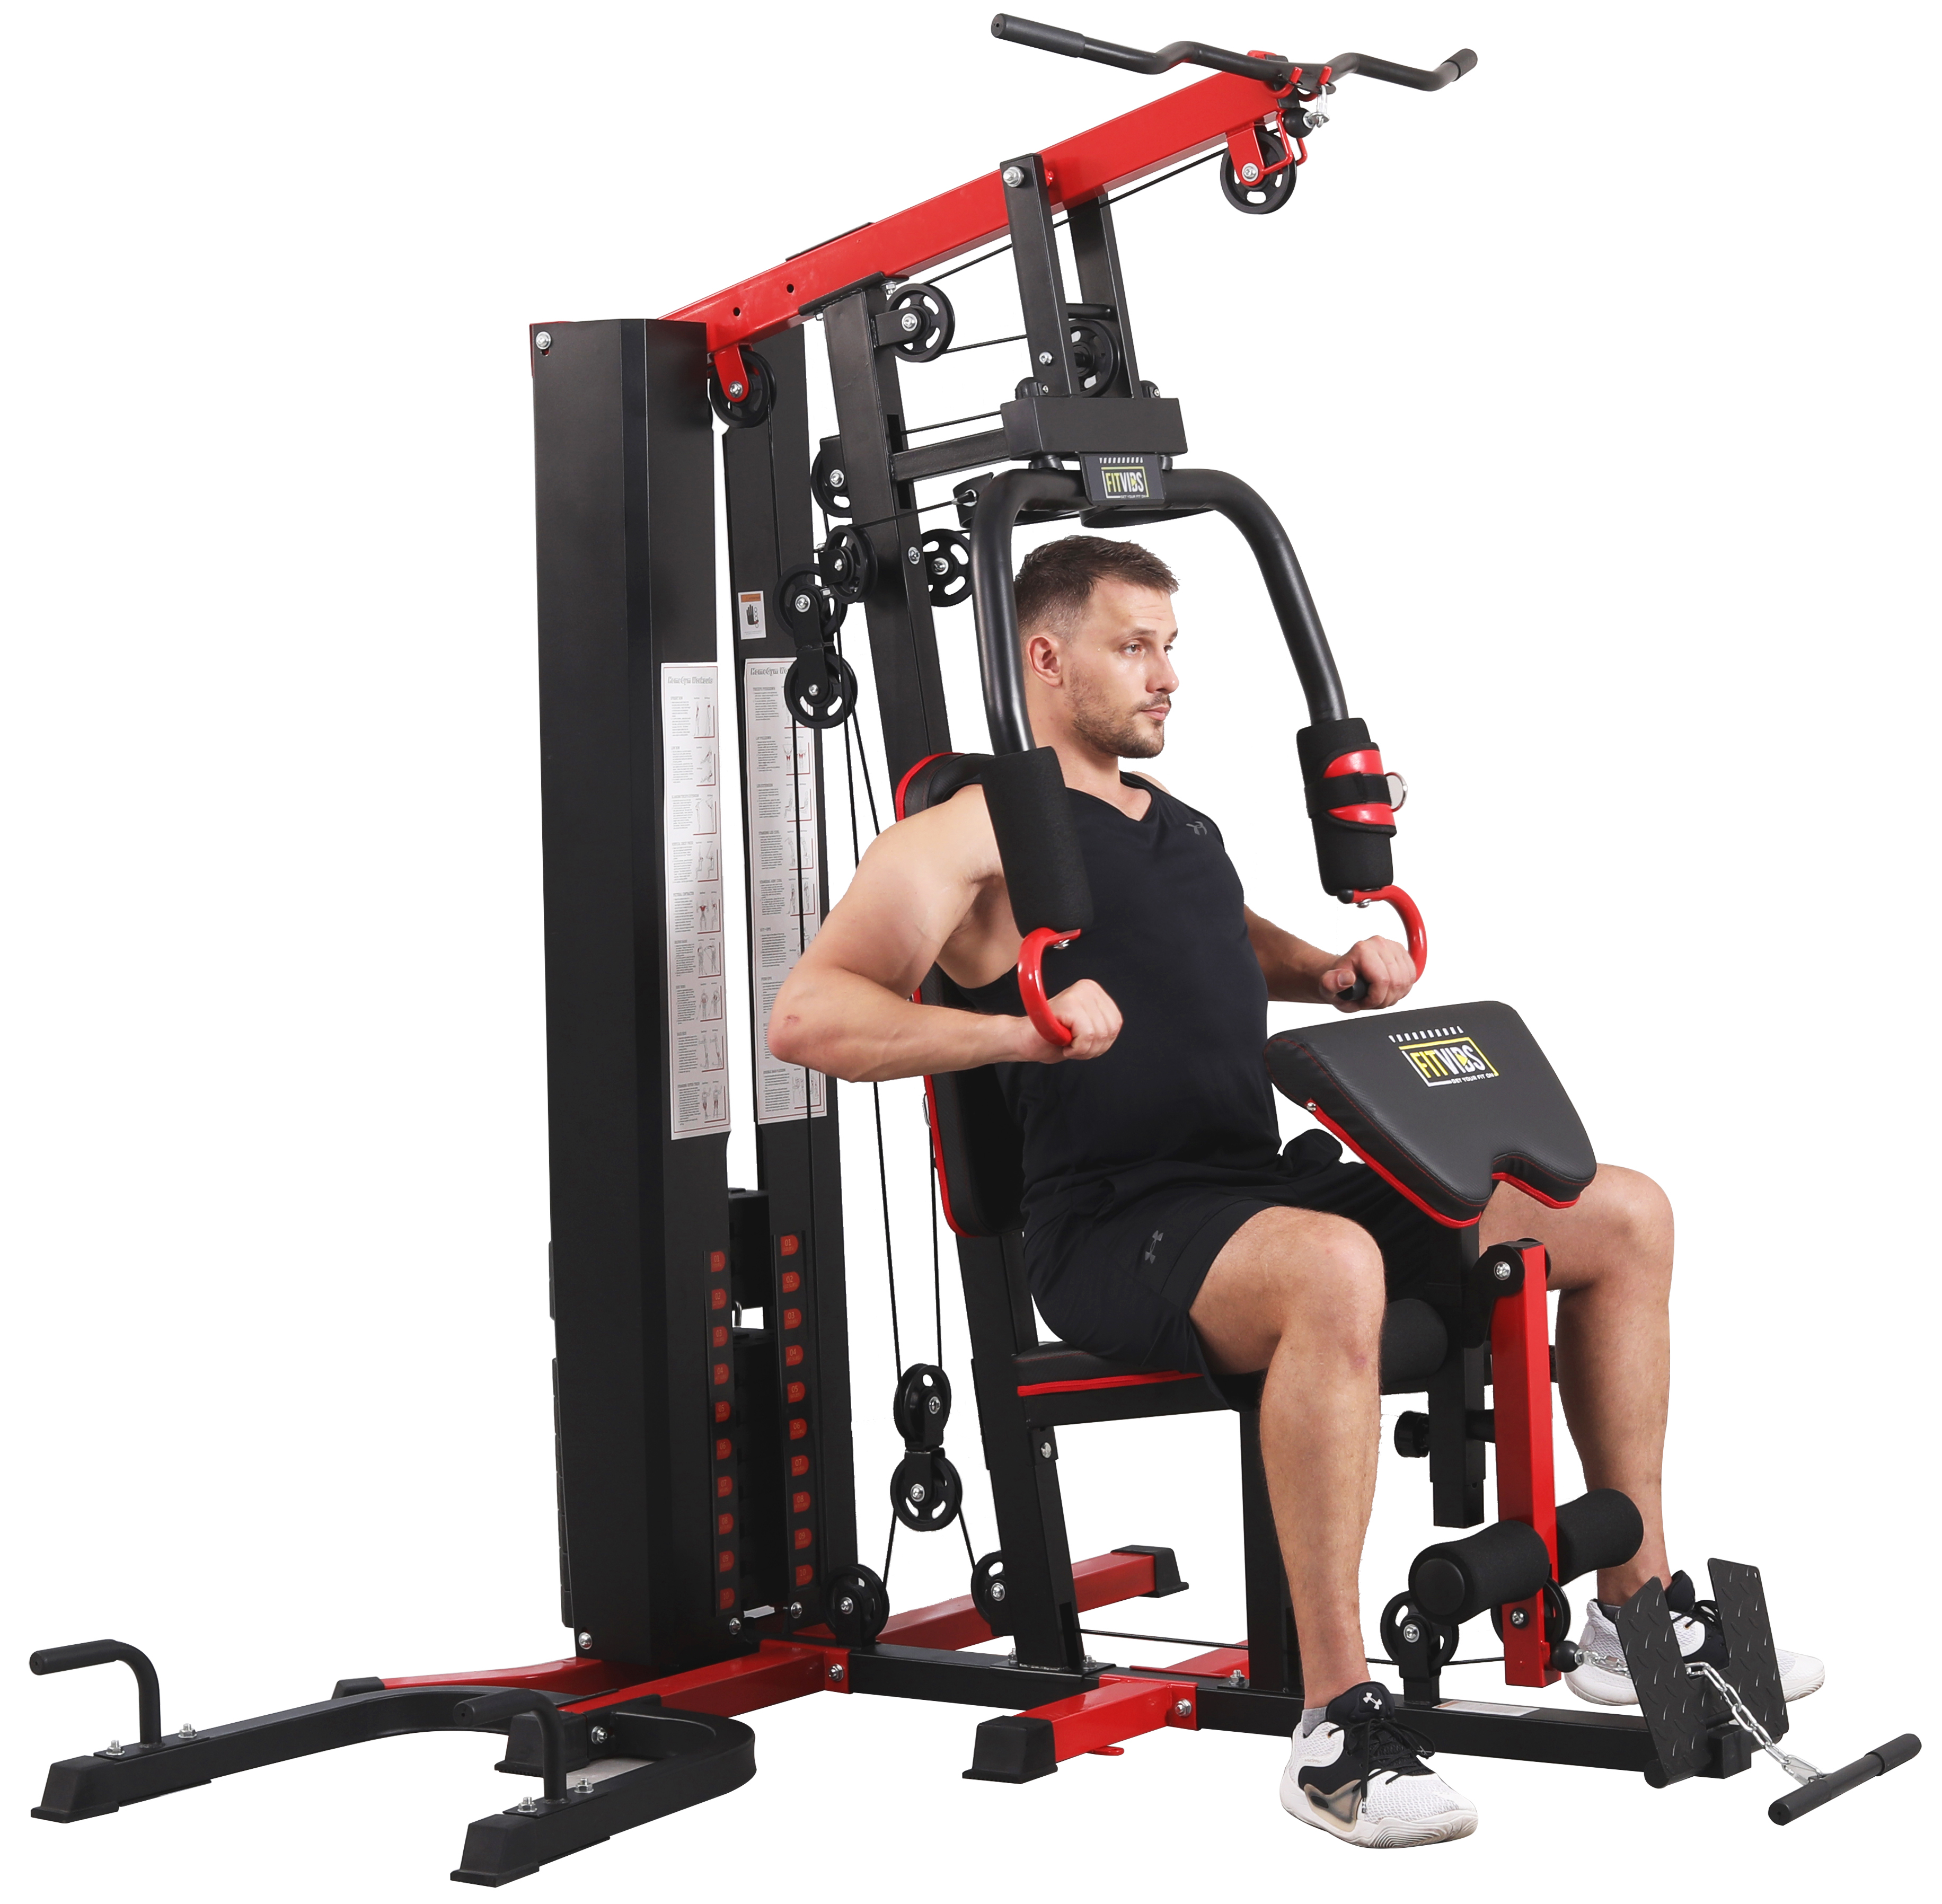 Fitvids LX800 Home Gym System Workout Station with 330 Lbs of Resistance, 122.5 Lbs Weight Stack, Two Station, Comes with Installation Instruction Video, Ships in 6 Boxes - image 4 of 13